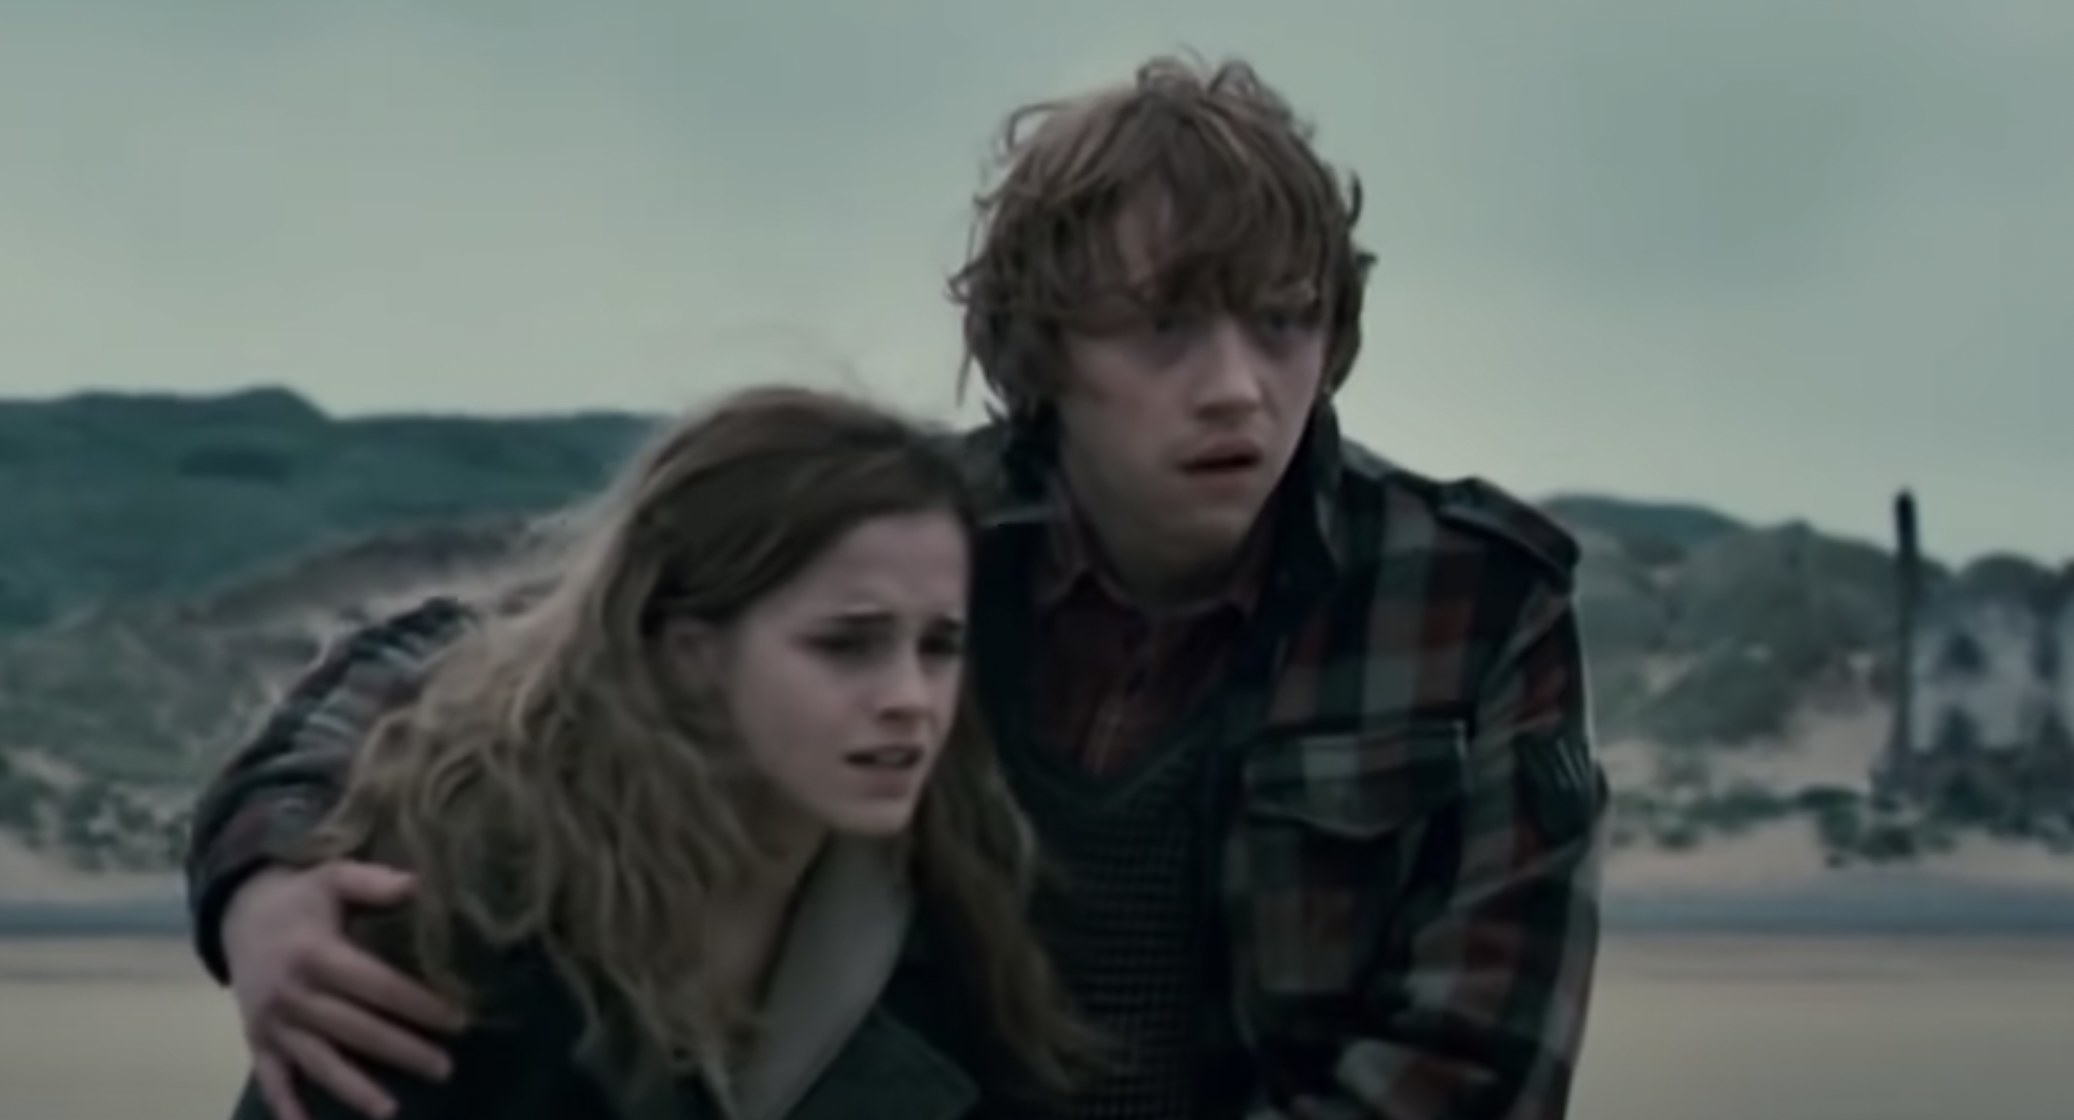 Hermione and Ron embracing and looking anguished